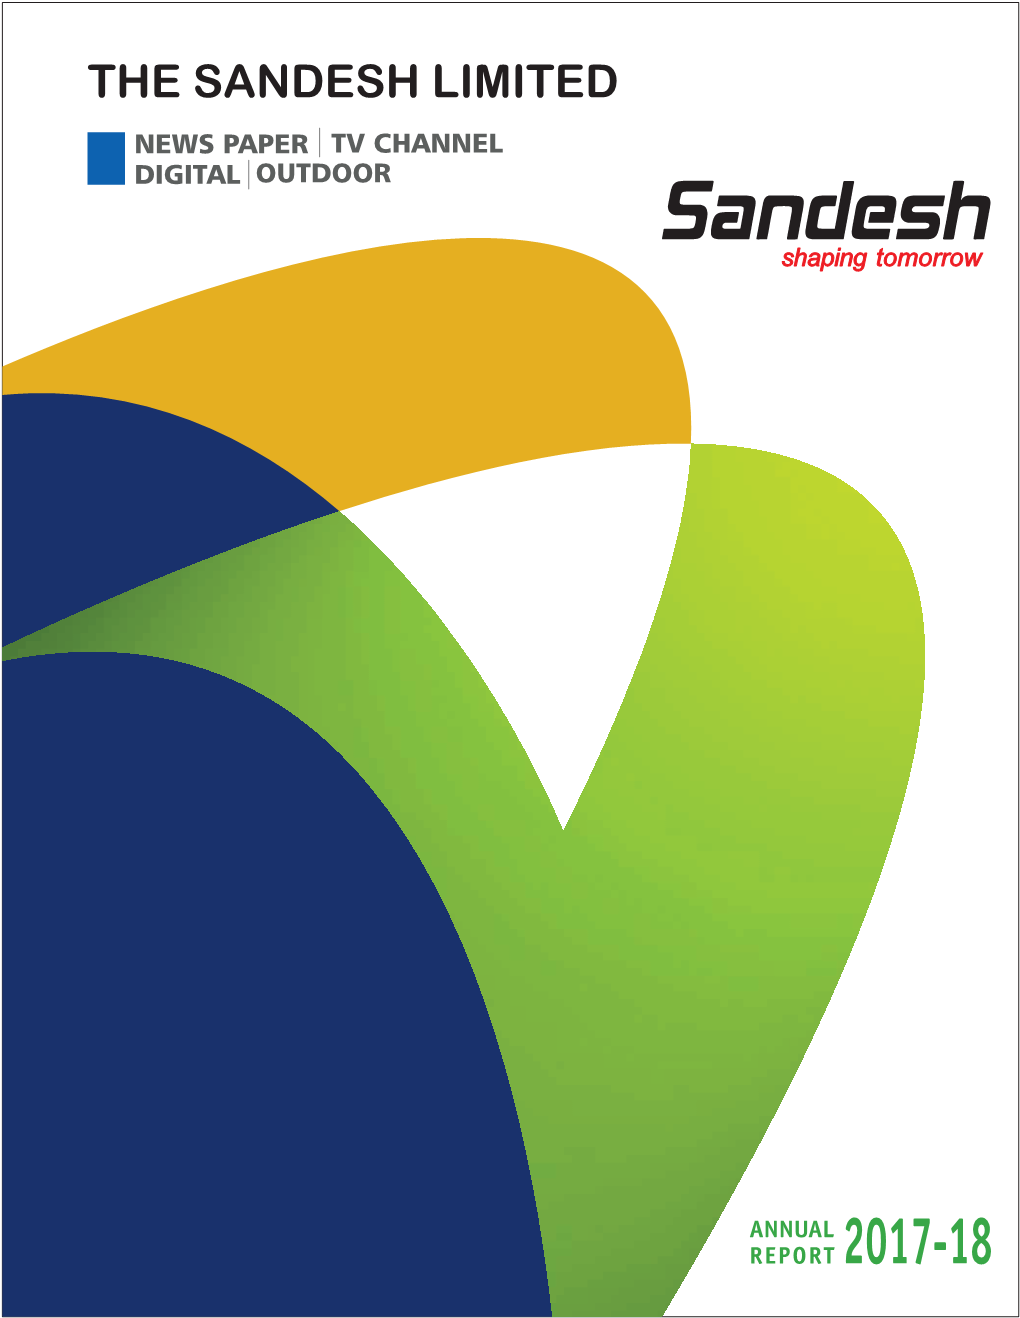 The Sandesh Limited